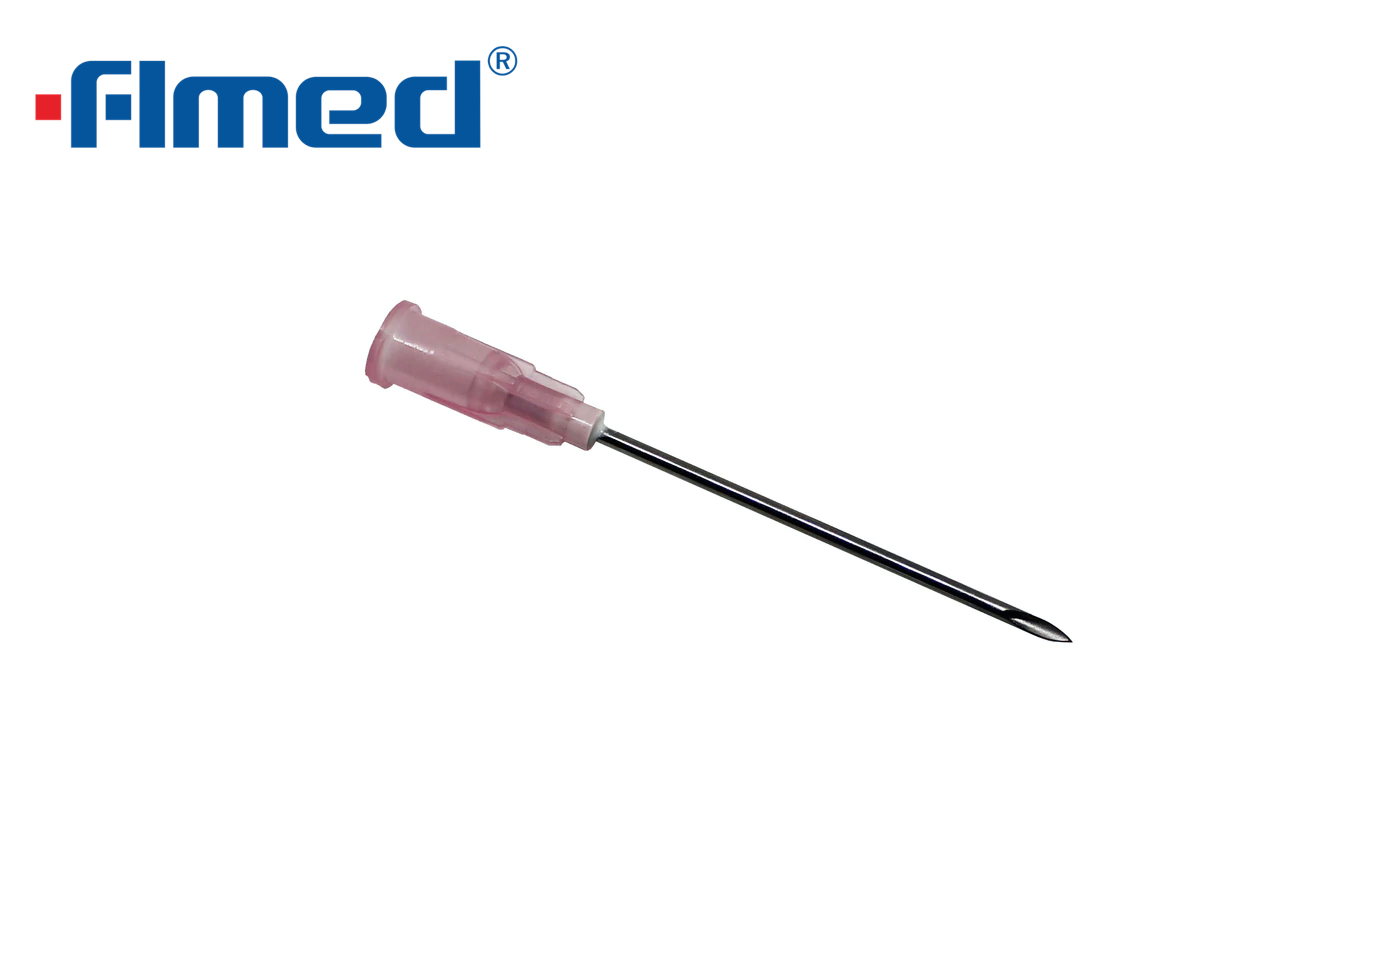 18G Hypodermic Needle (1.2mm X 38mm) Pink (18G X 1, 1/2" Inch)